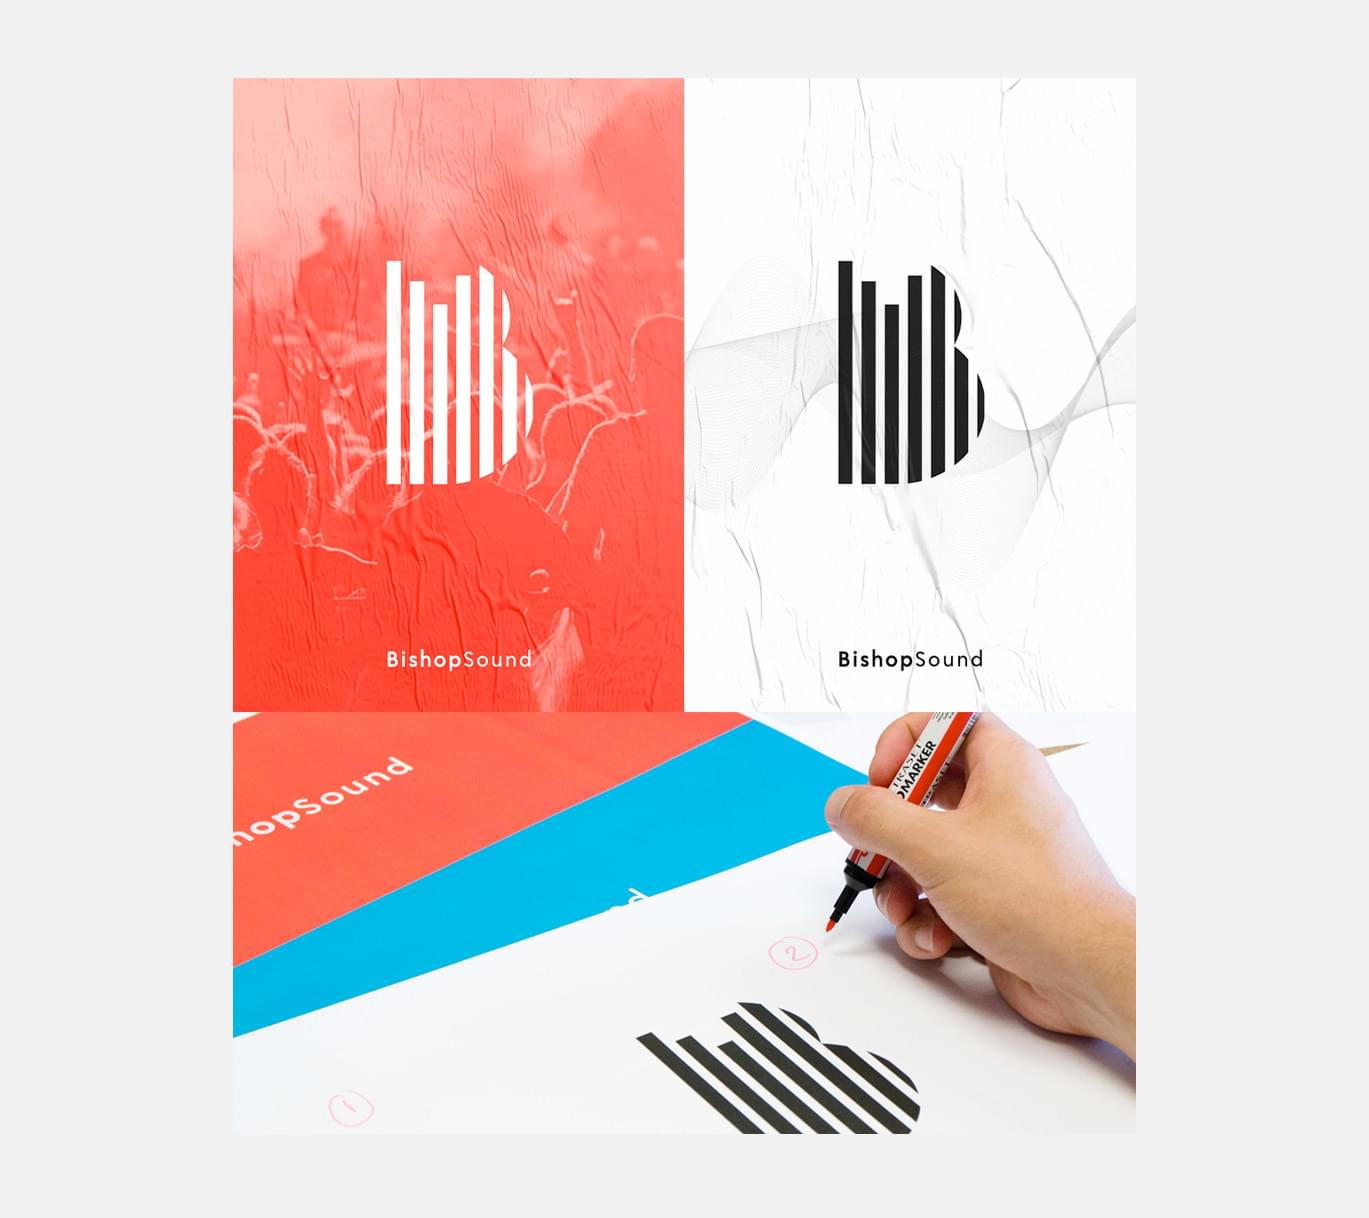 The colour palette of the BishopSound brand, a key element of visual brand identity.